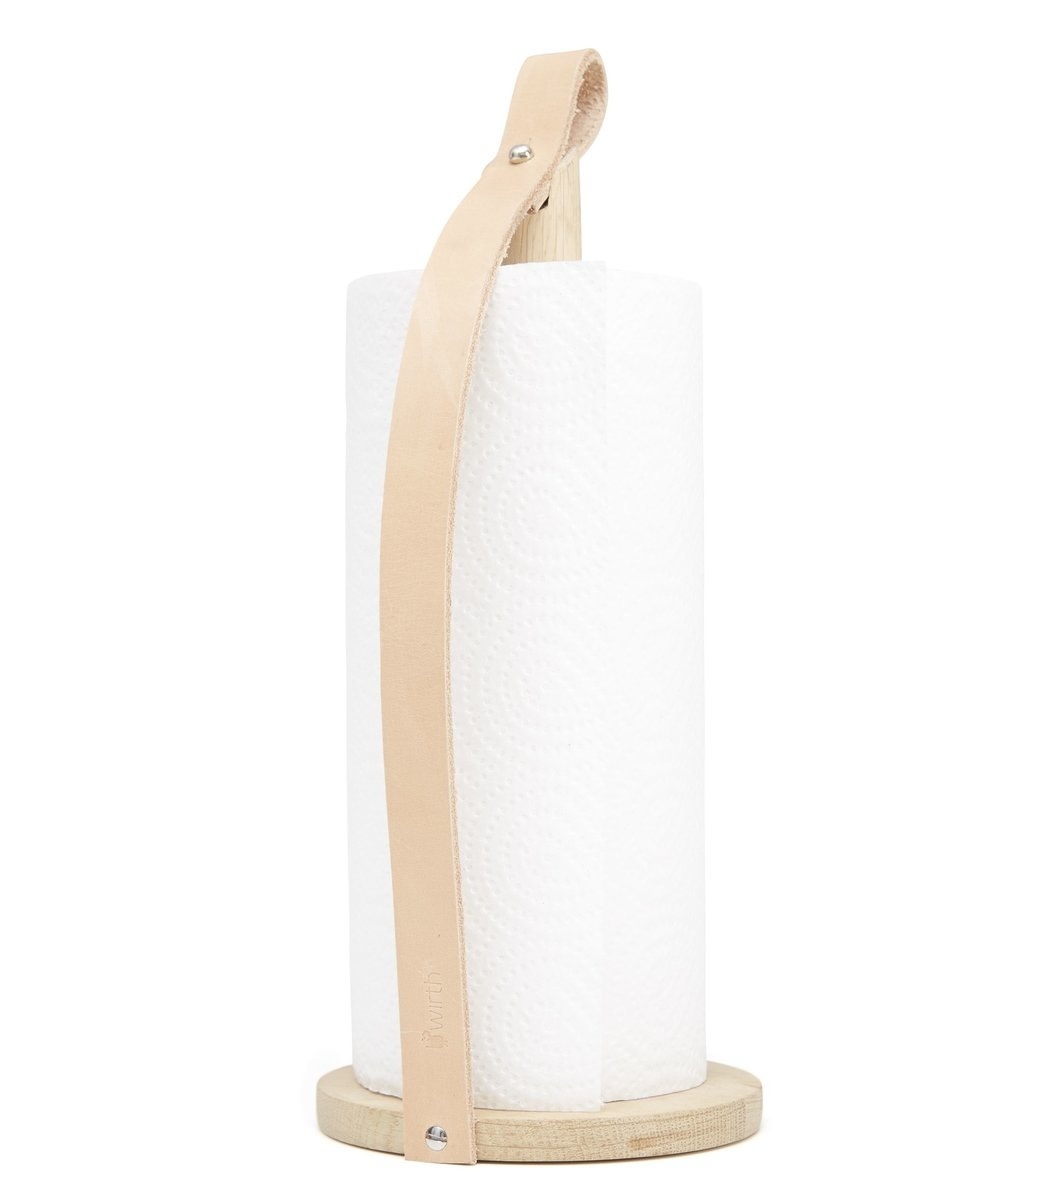 https://cdn.webshopapp.com/shops/307257/files/360775048/by-wirth-by-wirth-kitchen-roll-holder-soap-treated.jpg